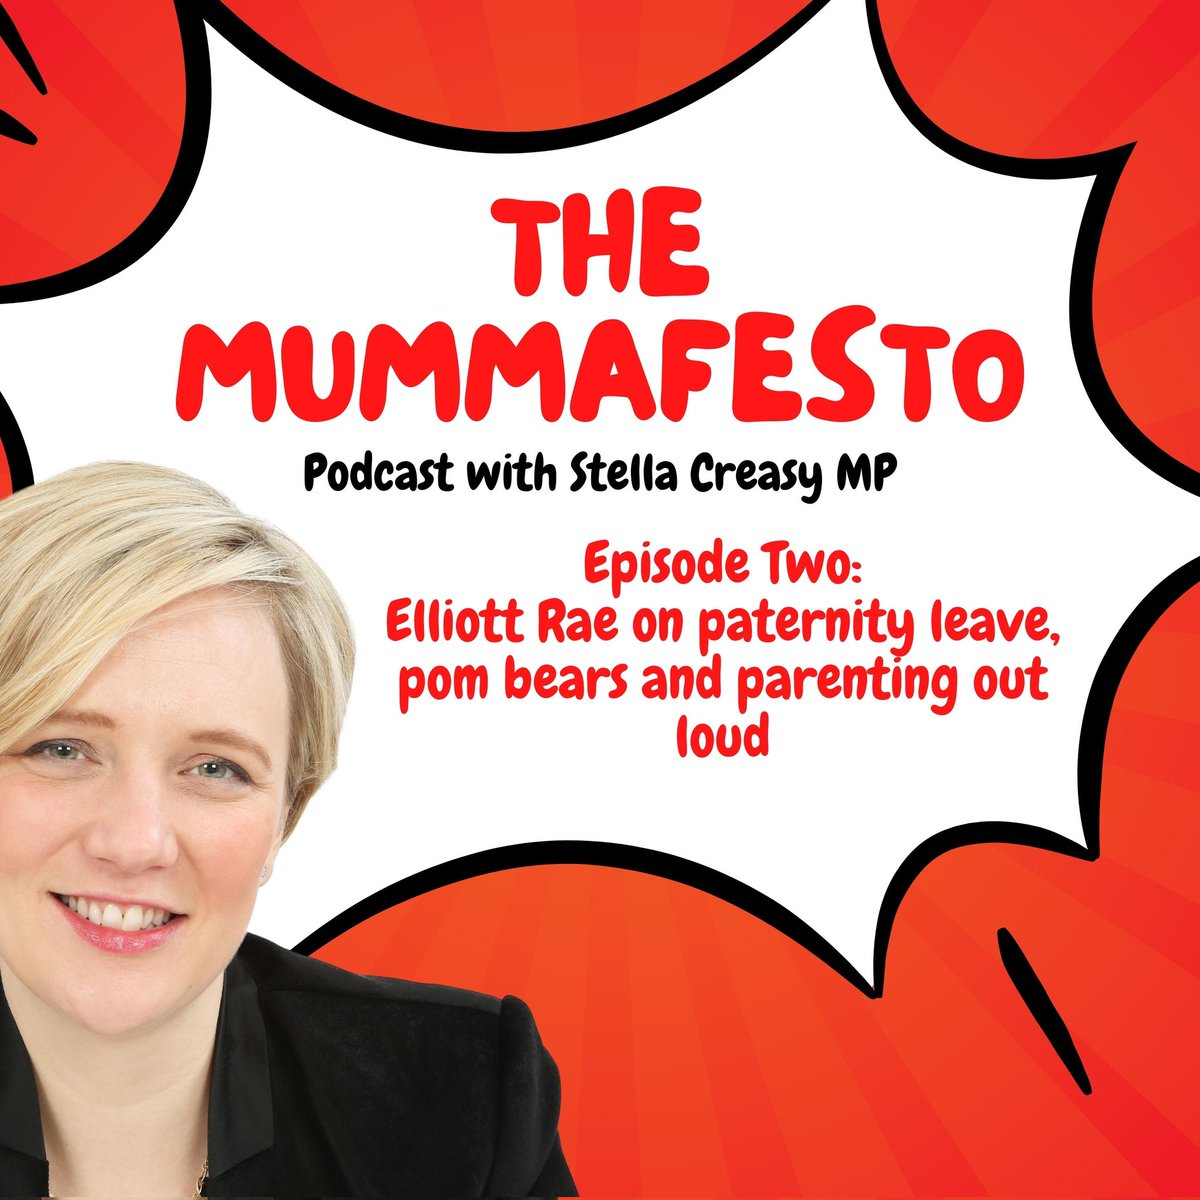 Equal parenting is key to gender equality with around 80% of the gender pay gap attributed to the motherhood penalty.

Employers need to support dads to Parent Out Loud at work.

We spoke about this with @StellaCreasy on her podcast, Mummafesto!

Listen: open.spotify.com/episode/2CKqao…